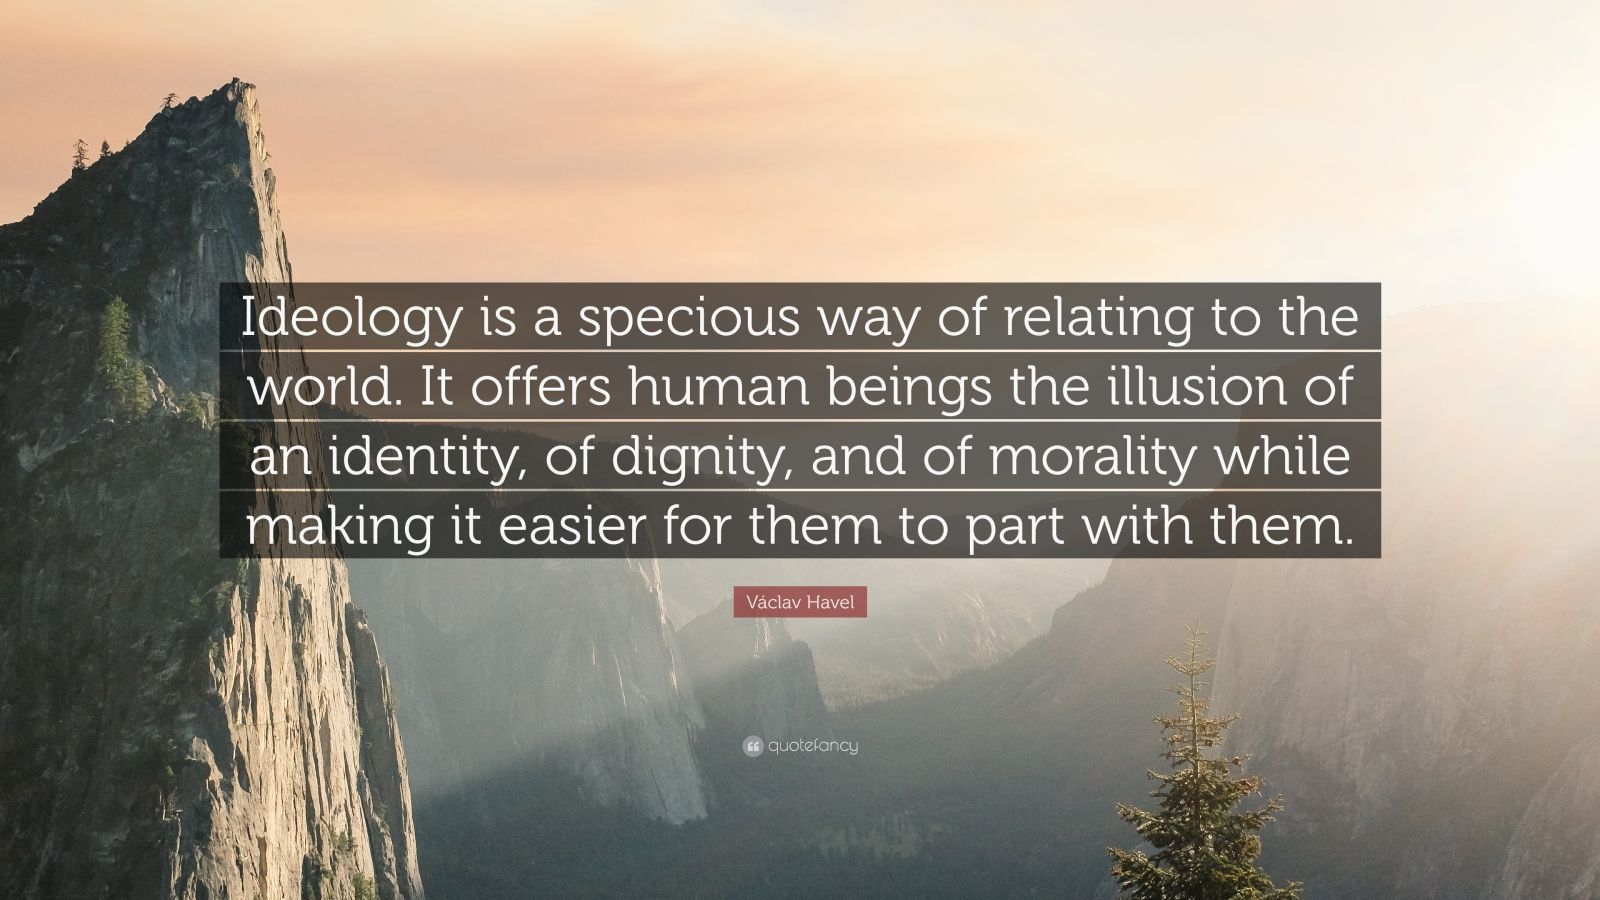 Václav Havel Quote: "Ideology is a specious way of ...